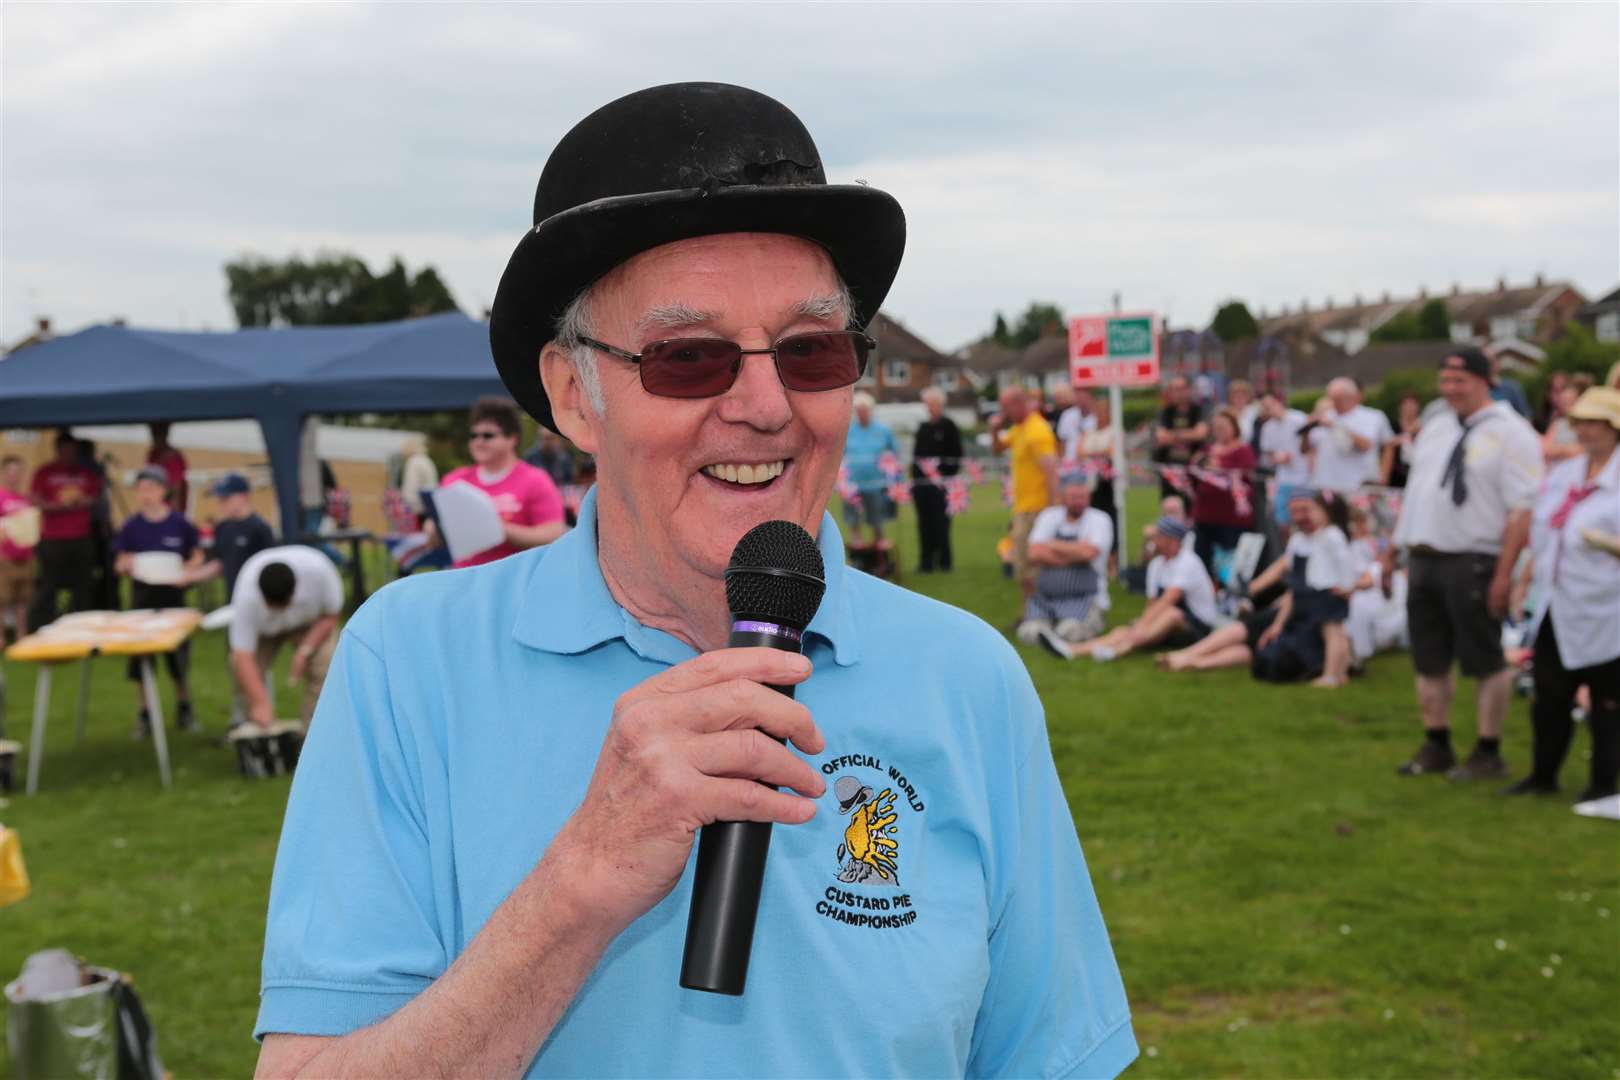 Mike Fitzgerald comparing the World Custard Pie Throwing Championships at Coxheath in 2014